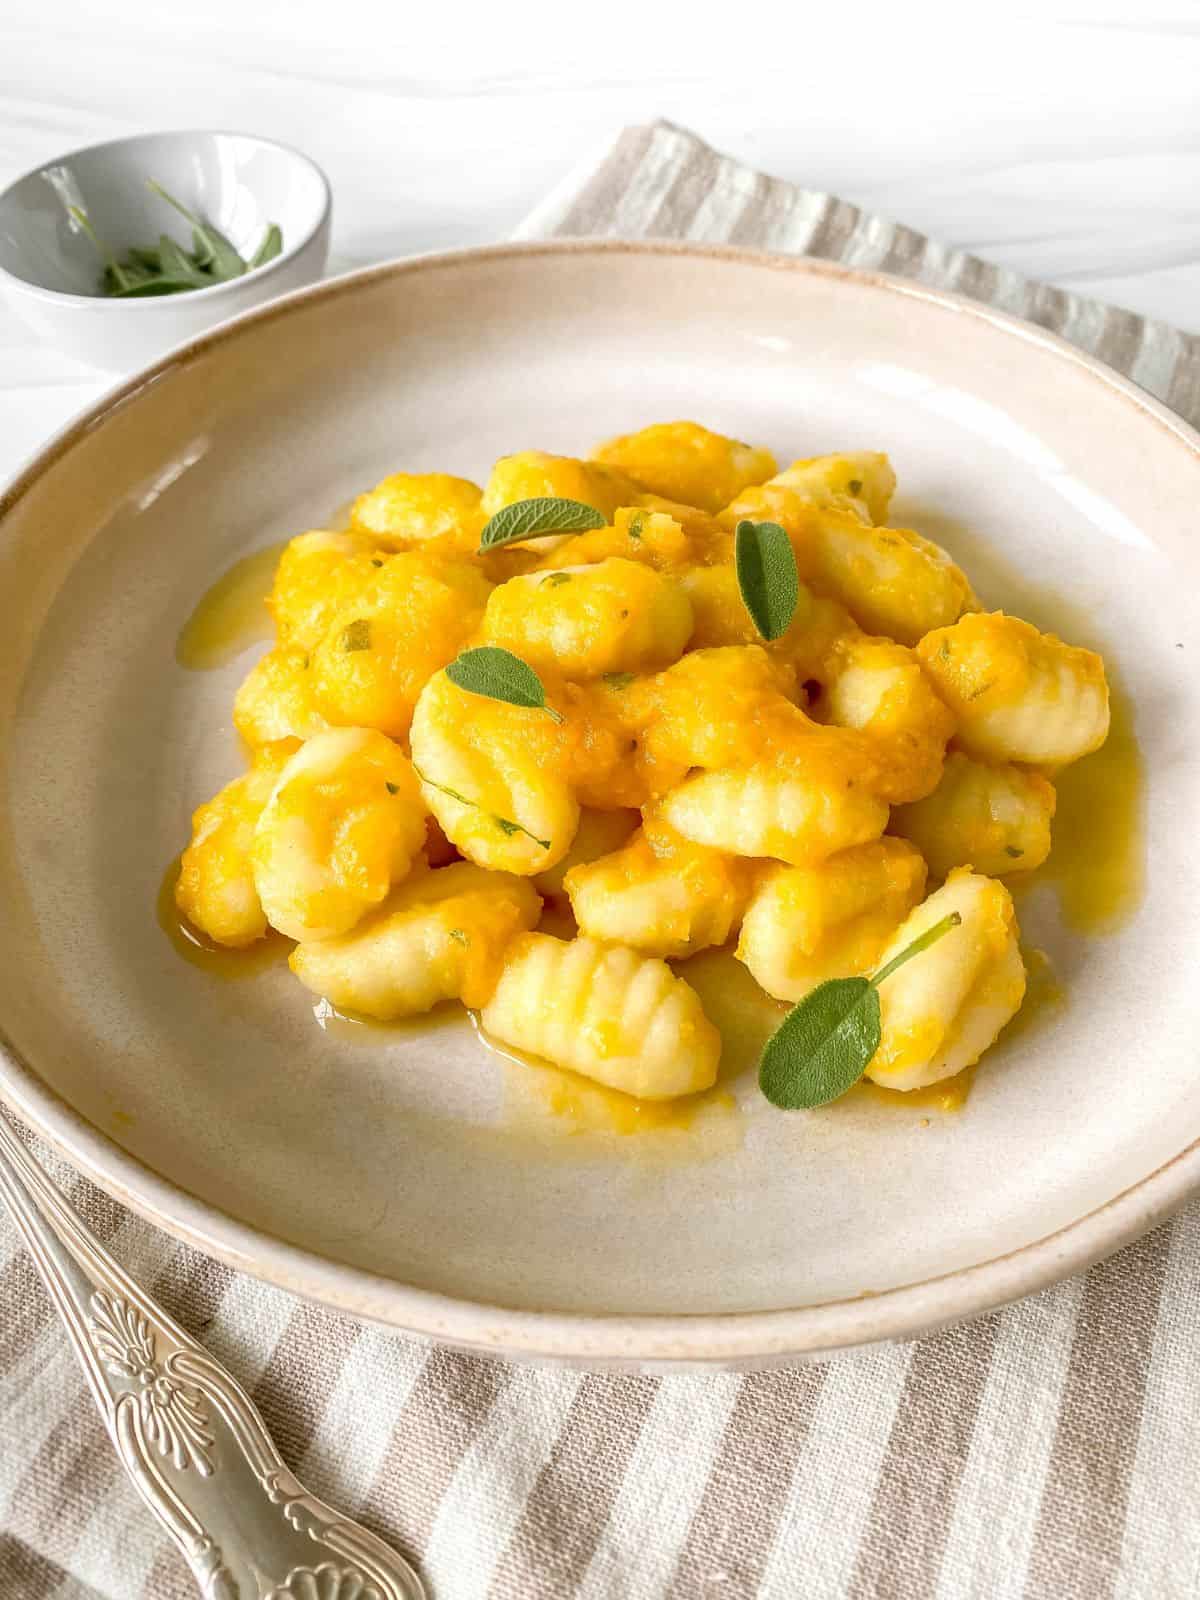 gnocchi with butternut squash sauce in a light brown bowl on a striped cloth.